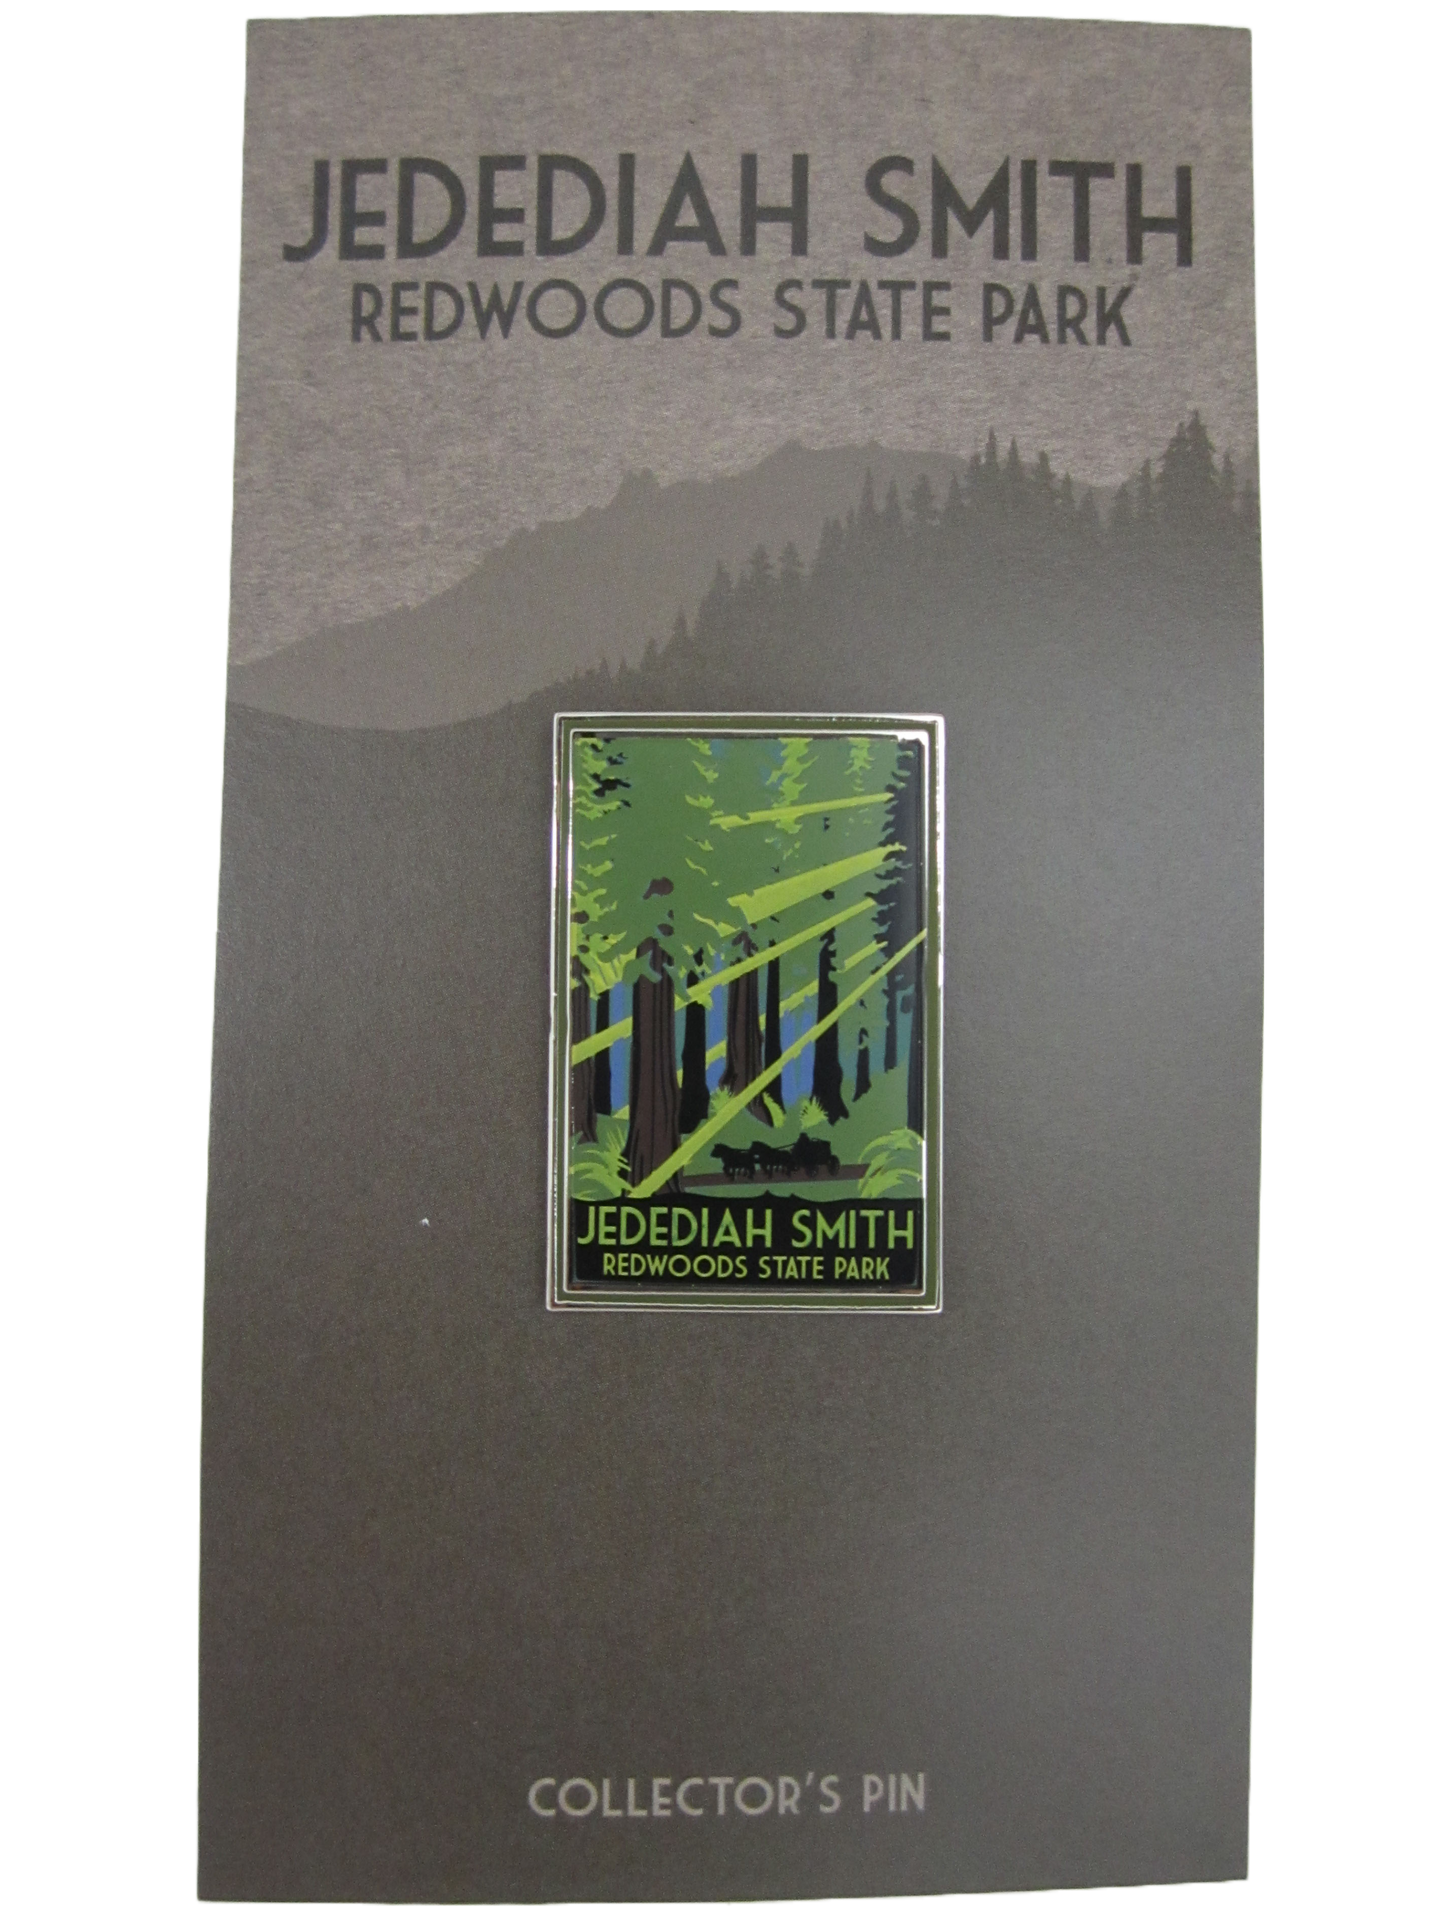 Jedediah Smith Redwoods State Park Collector's Pin